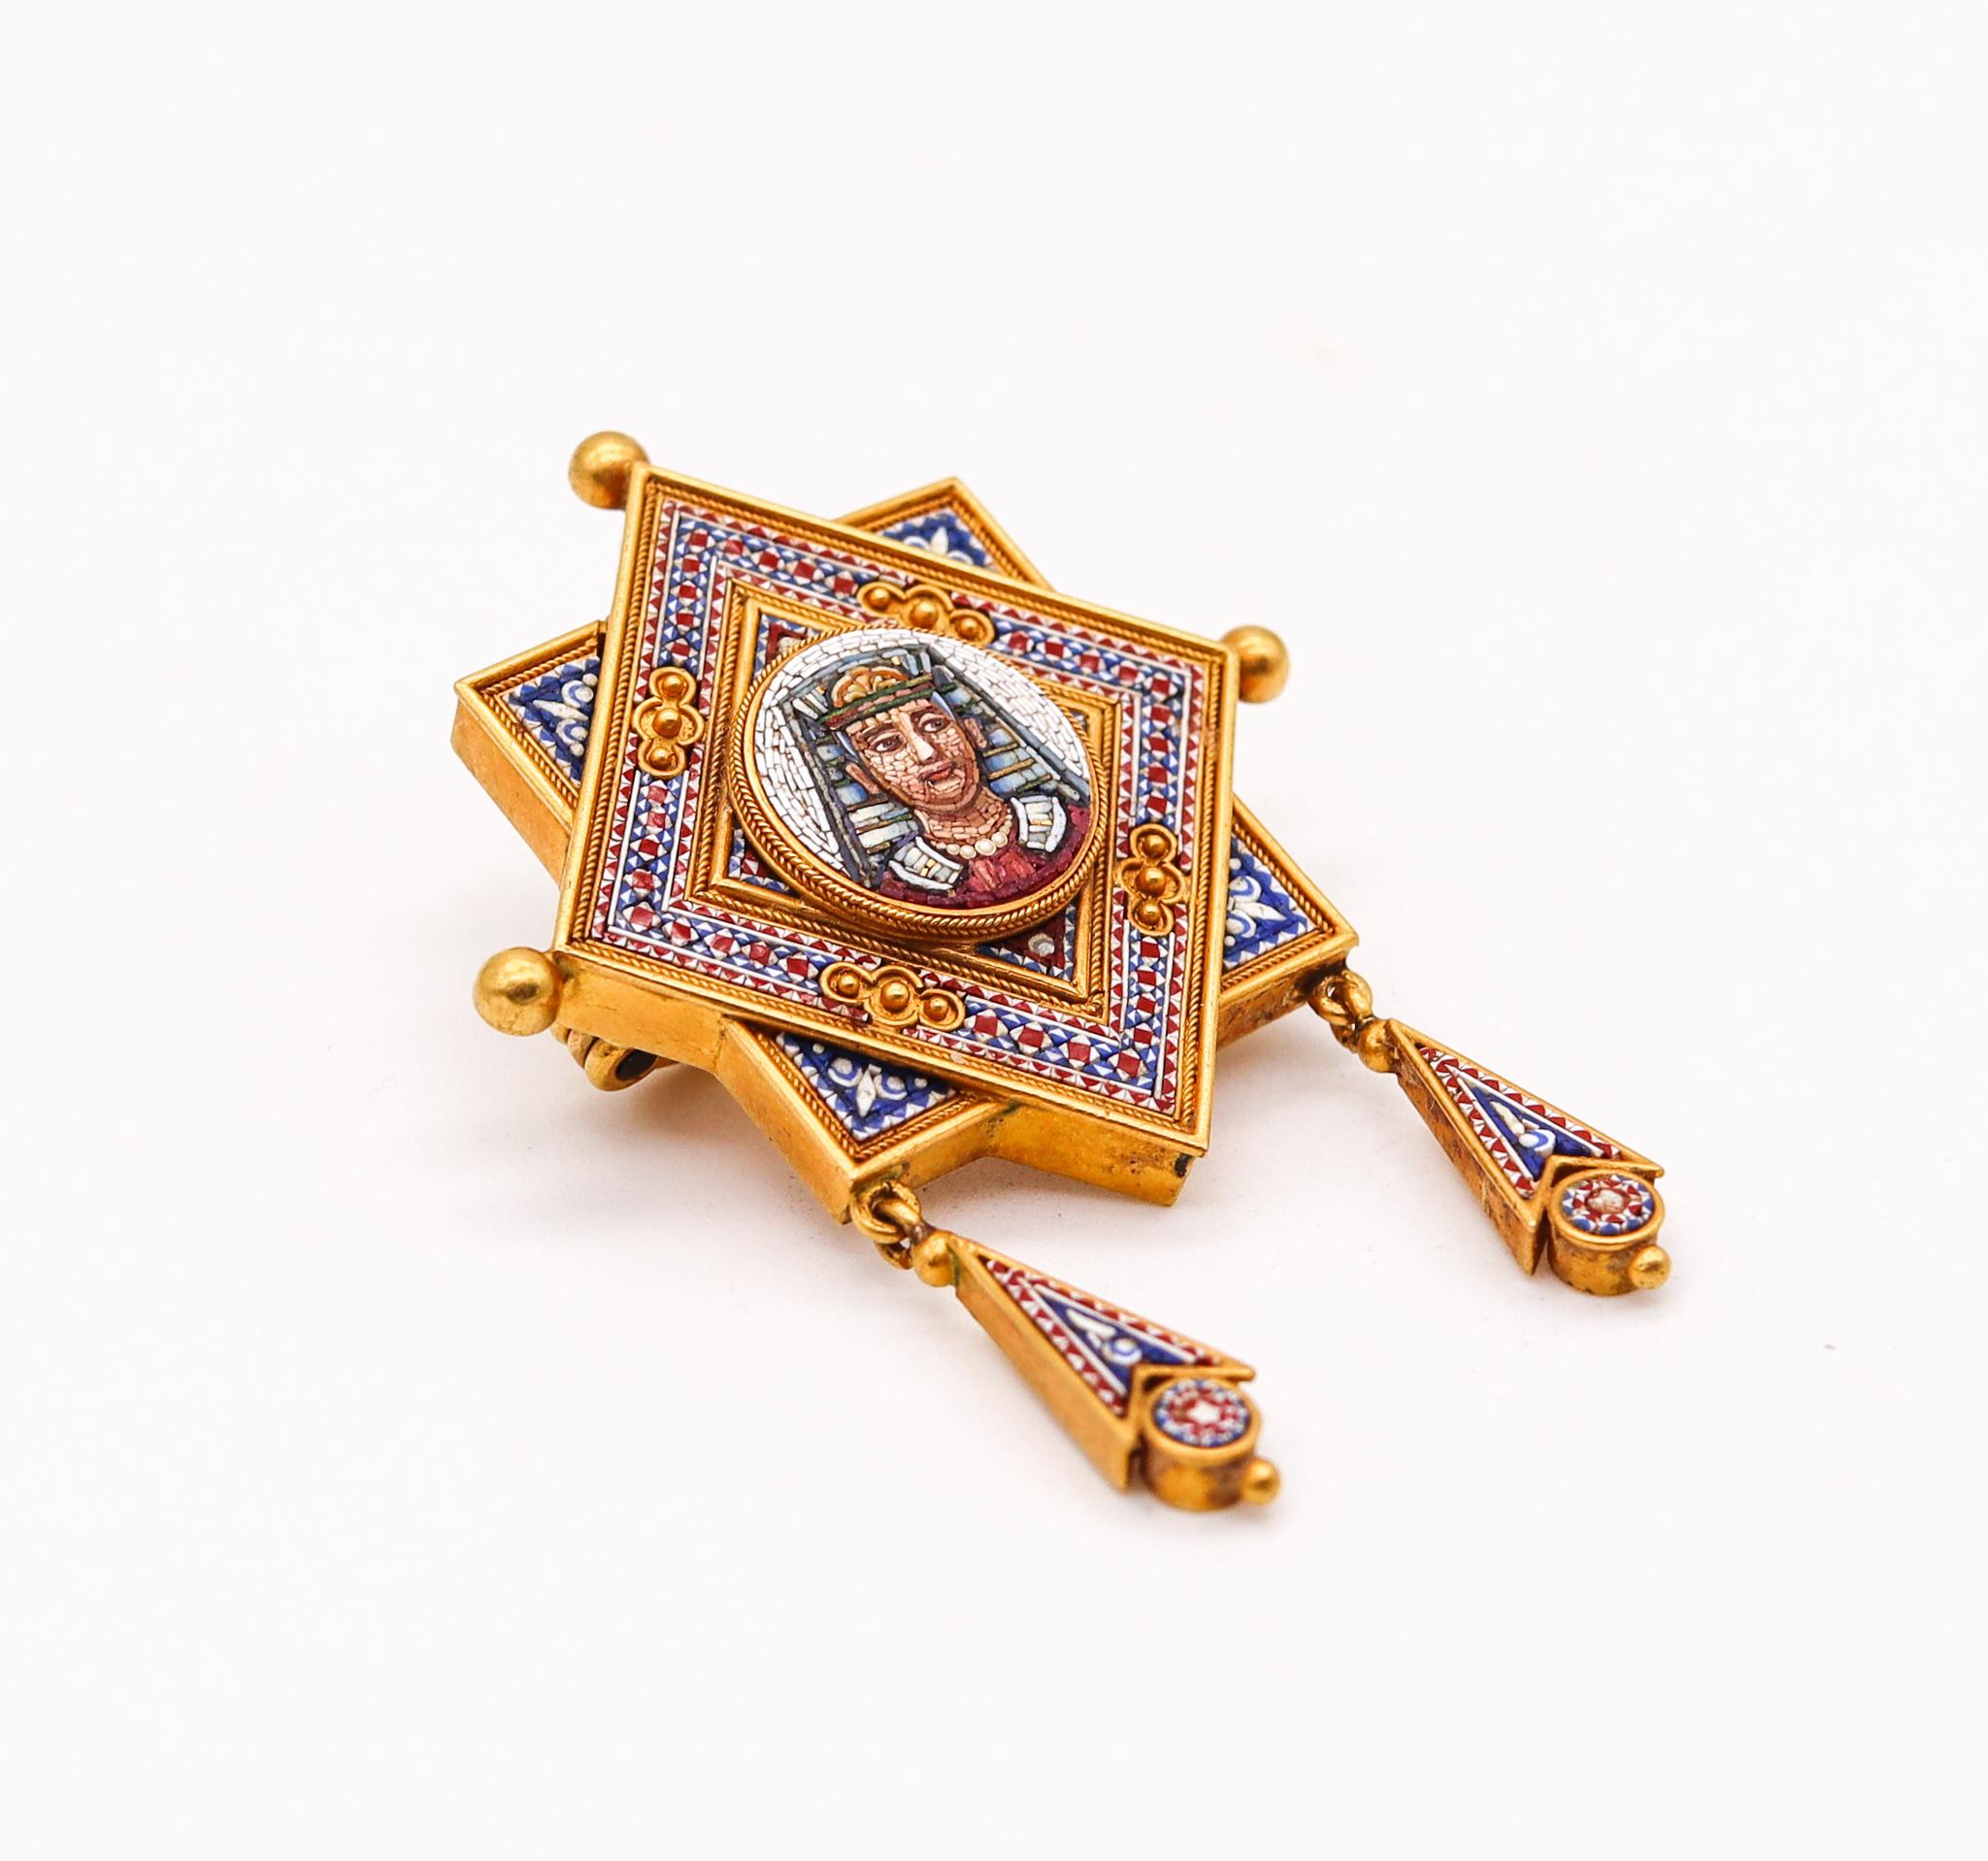 An Egyptian revival pendant brooch.

Fantastic piece, created in Roma Italy during the Papal States period, back in the 1850. This piece is really incredible detailed and was carefully crafted with Egyptian revival patterns, in solid rich yellow